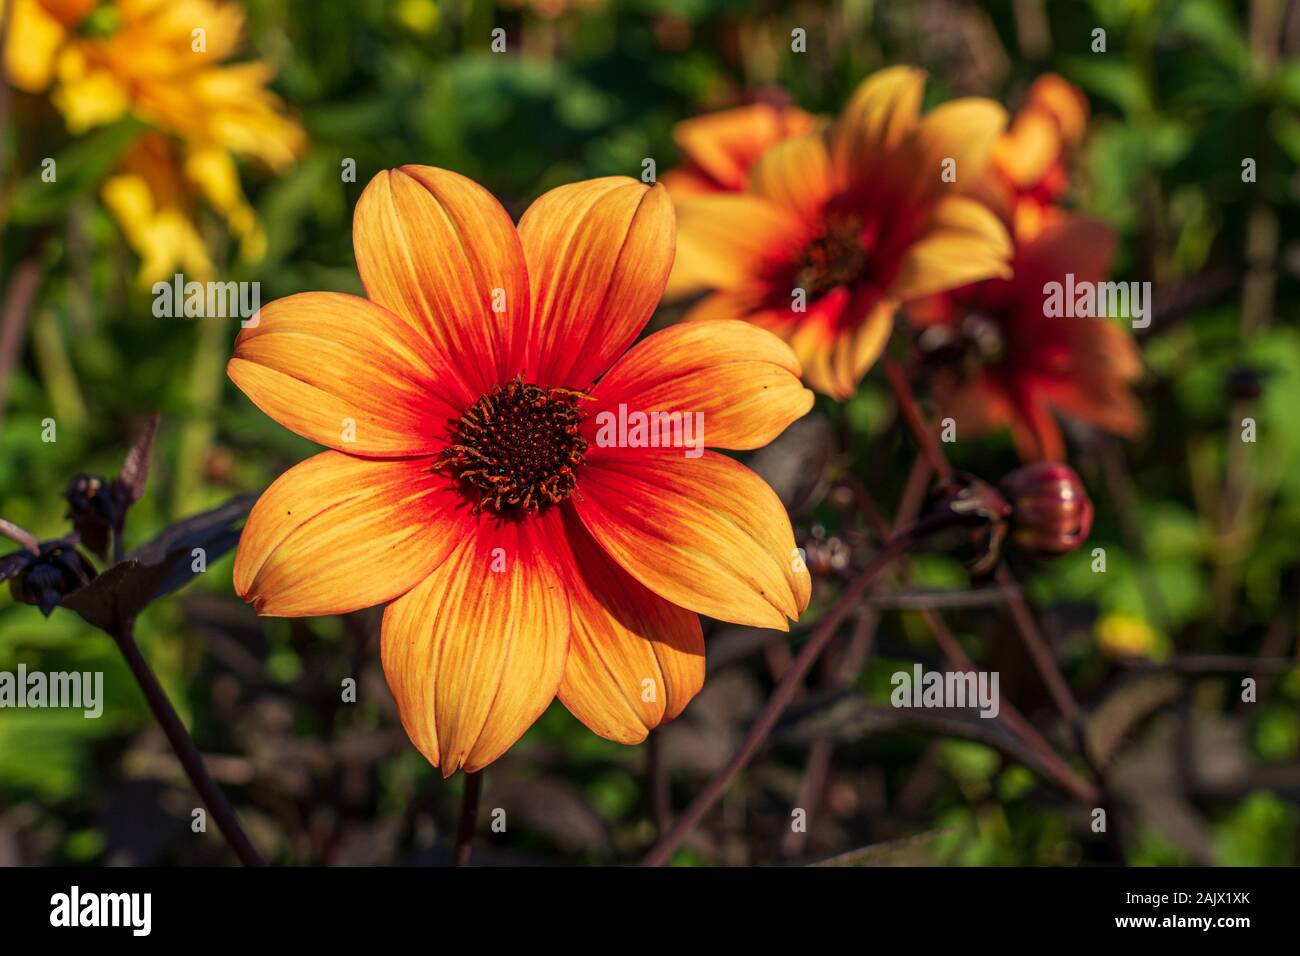 Close up of dahlia Hadrian's Sunset flower growing in a flower border with other dahlias in background Stock Photo